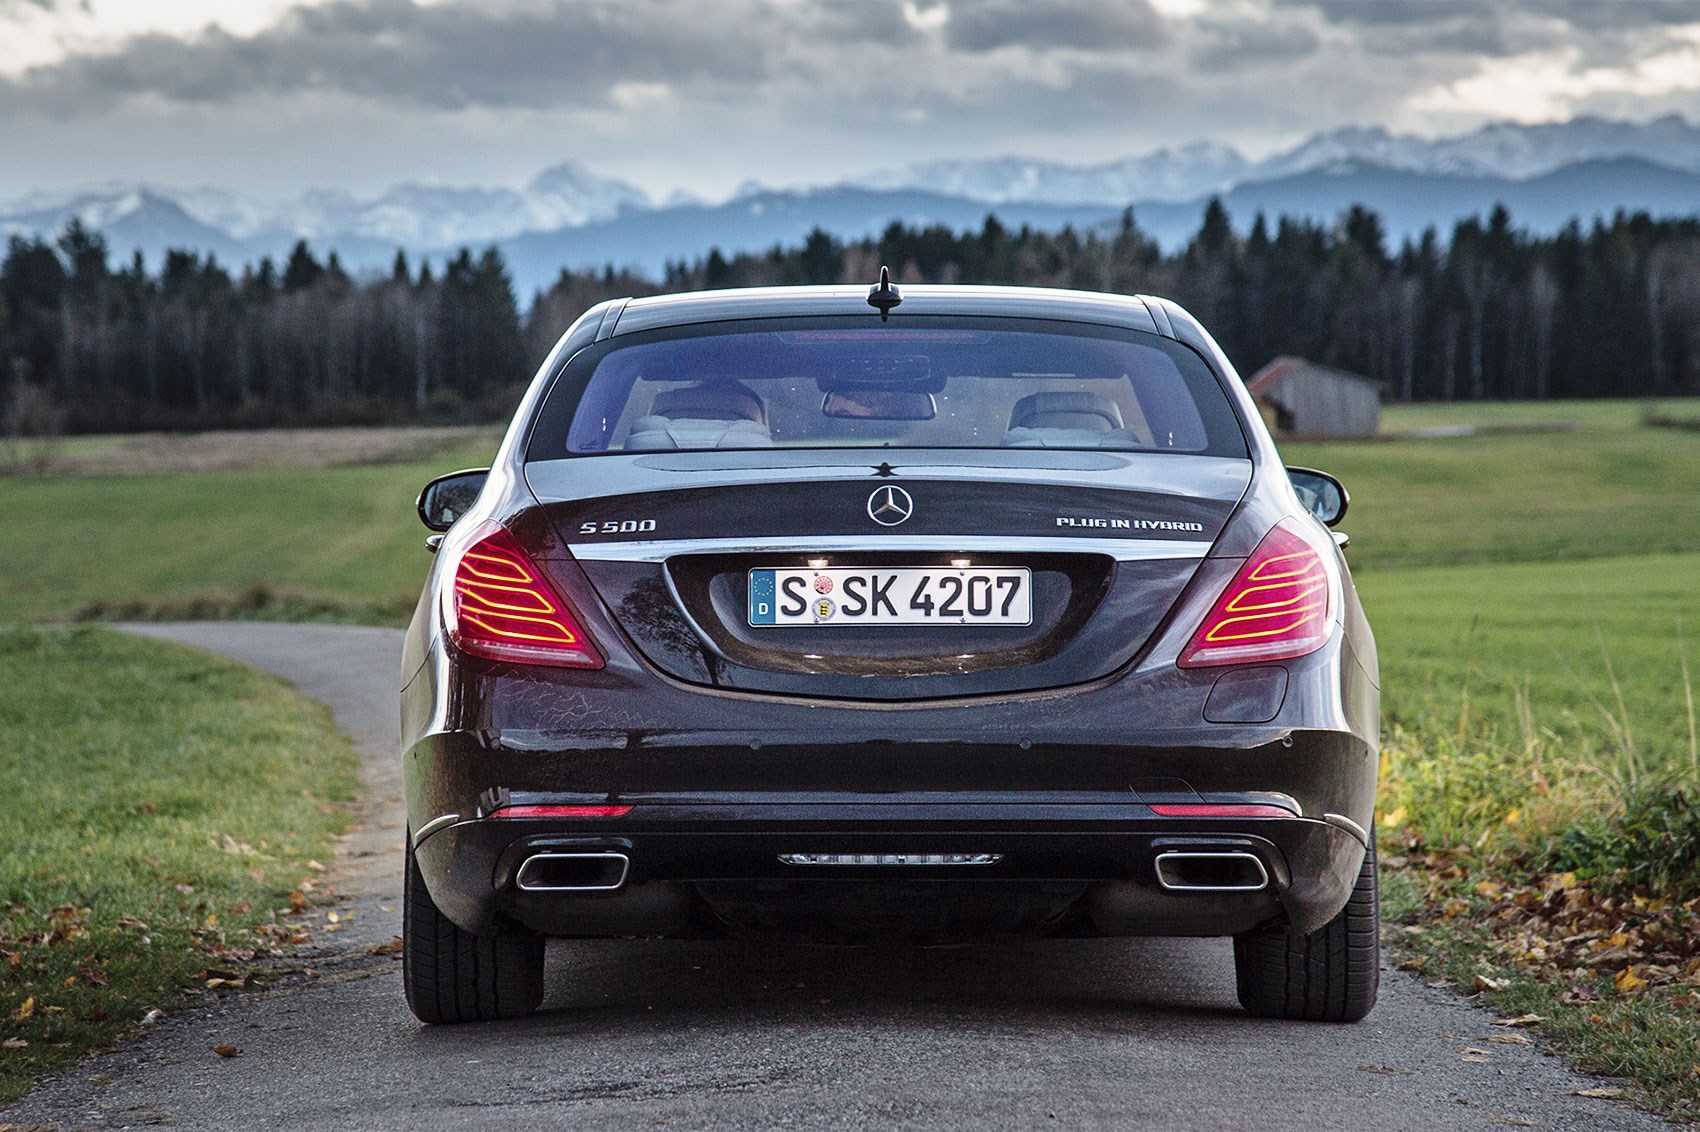 Mercedes-Benz S-Class W223 (Мерседес Бенц С-Класс) седан